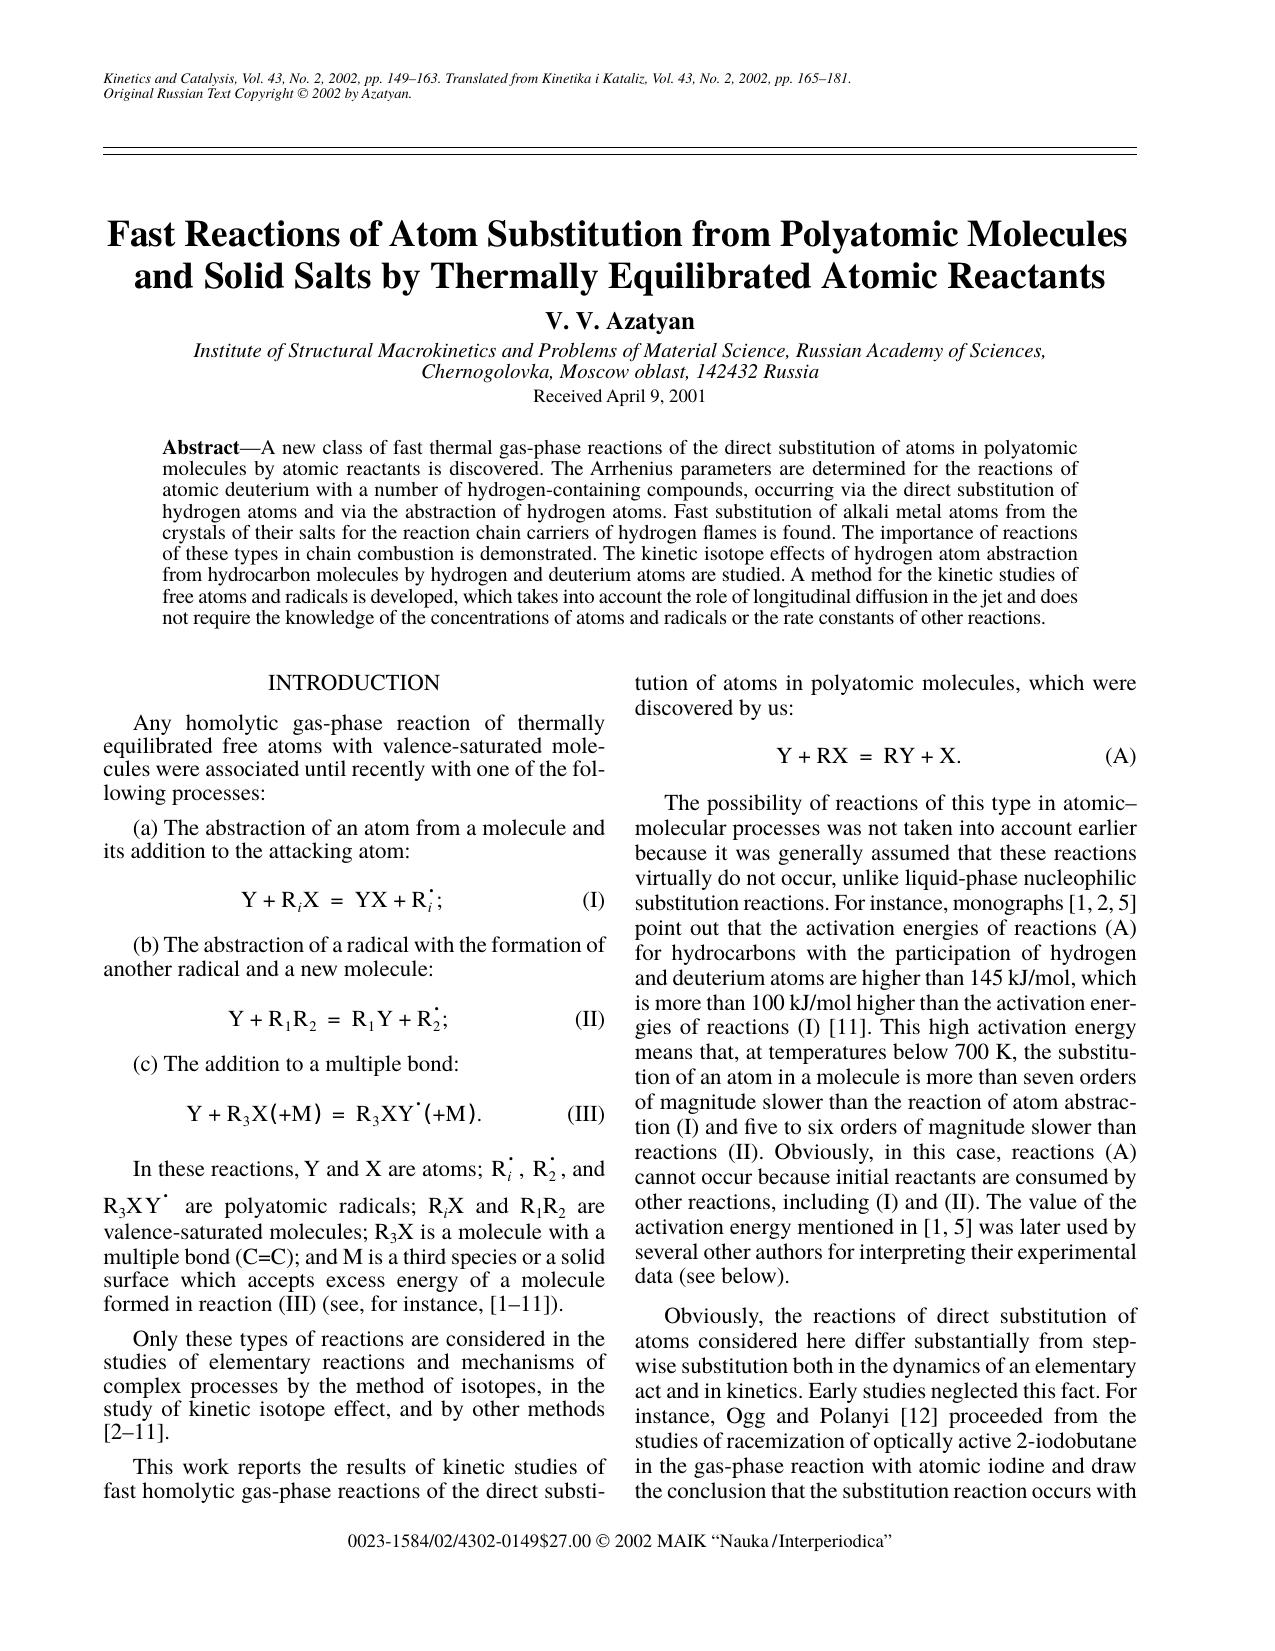 Fast Reactions of Atom Substitution from Polyatomic Molecules and Solid Salts by Thermally Equilibrated Atomic Reactants by Unknown